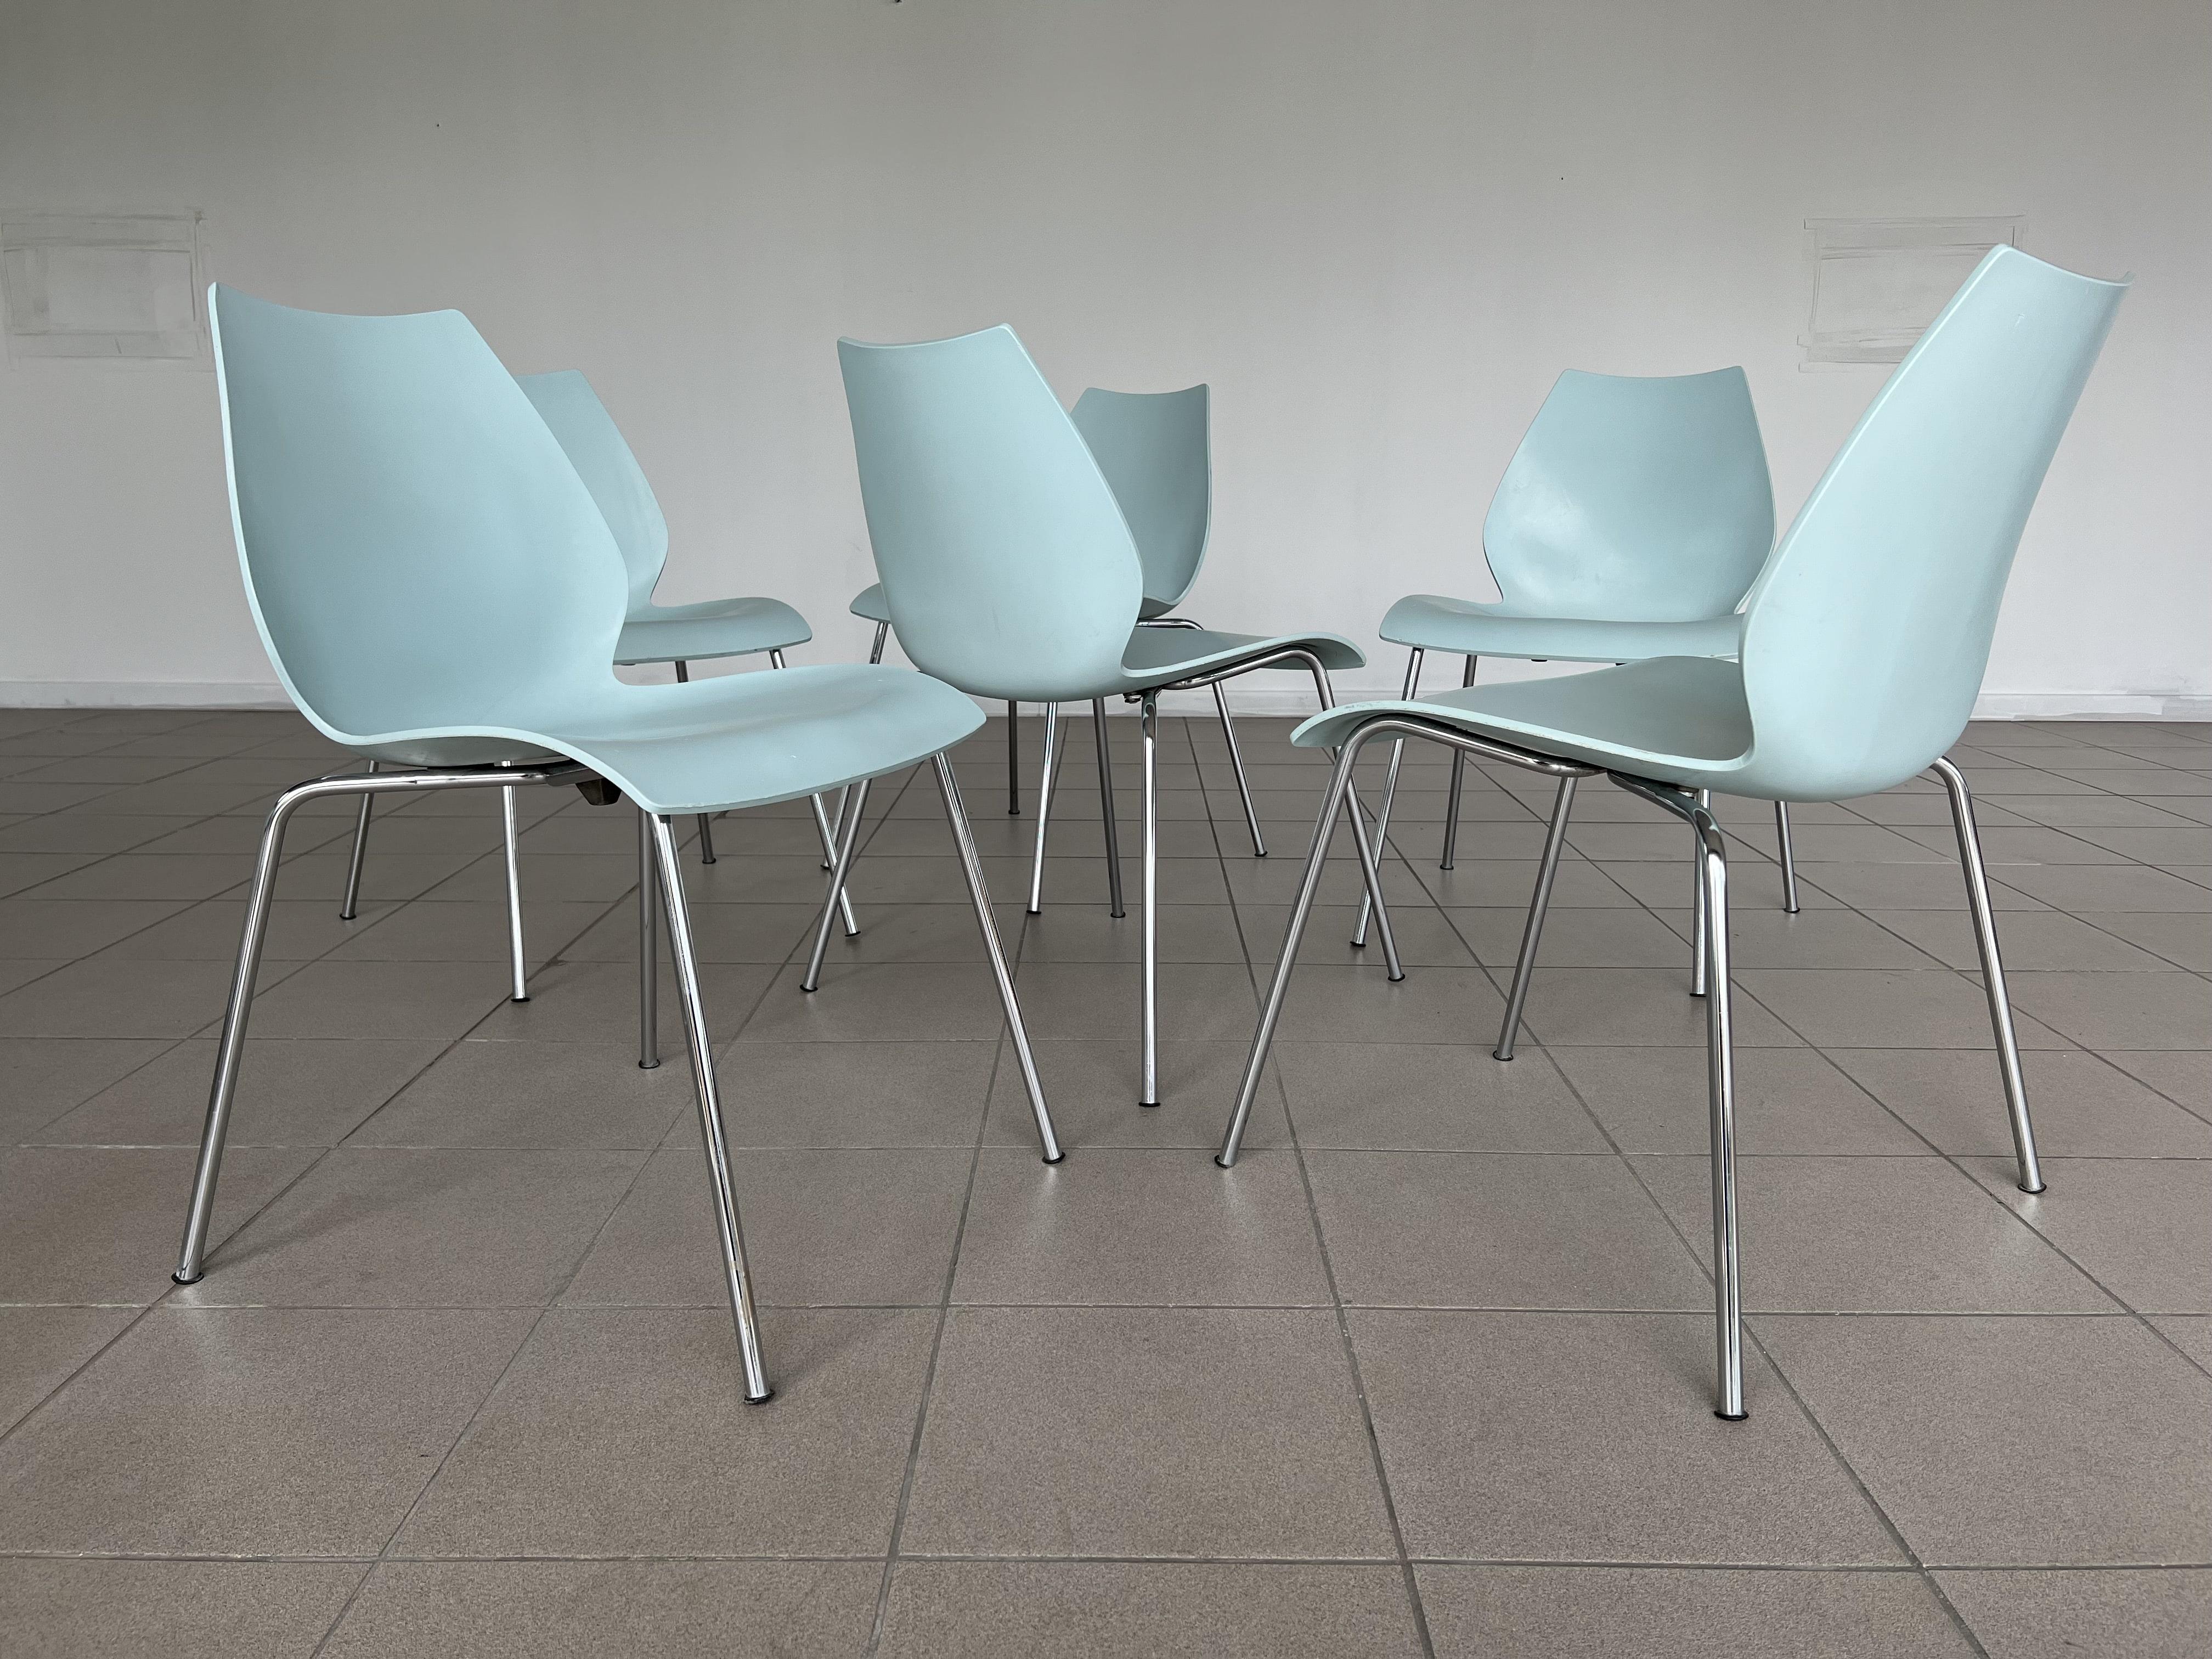 Late 20th Century Italian Maui Pale Blue Side Dining Chair Vico Magistretti for Kartell - Set of 6 For Sale